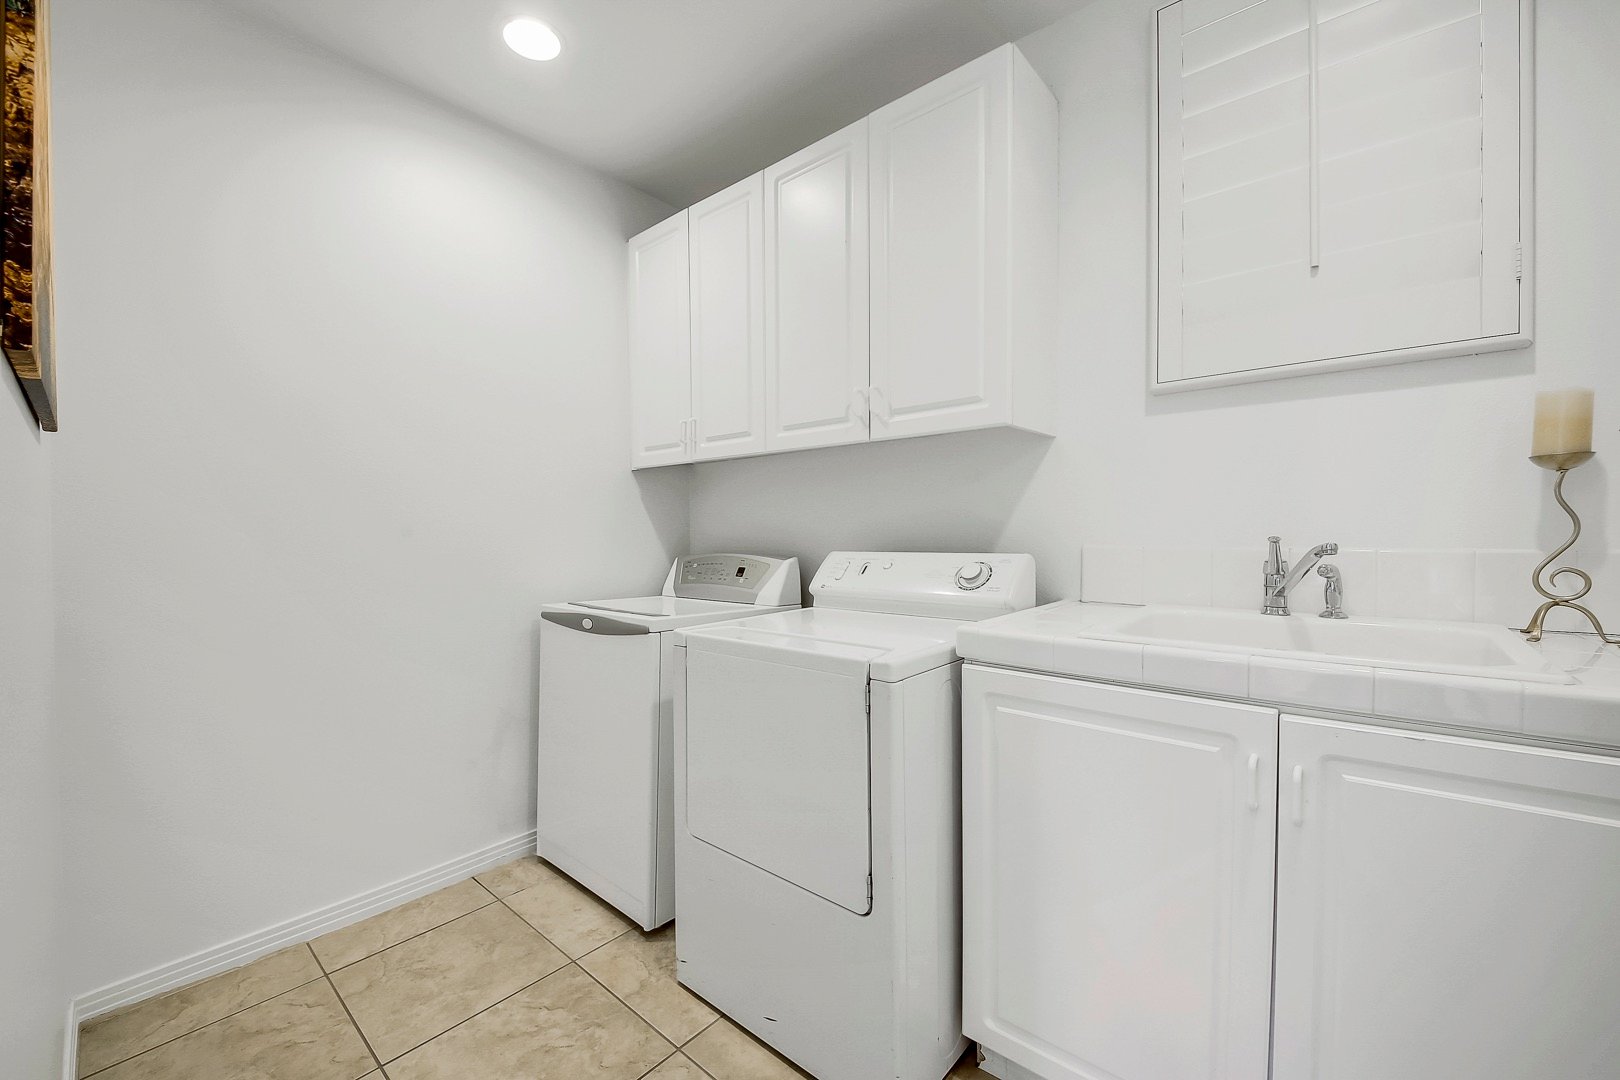 The laundry room is located across bedroom six and features a washer and dyer. Lots of cabinet space to store your clean clothes and a sink is readily available for your hand washing items.